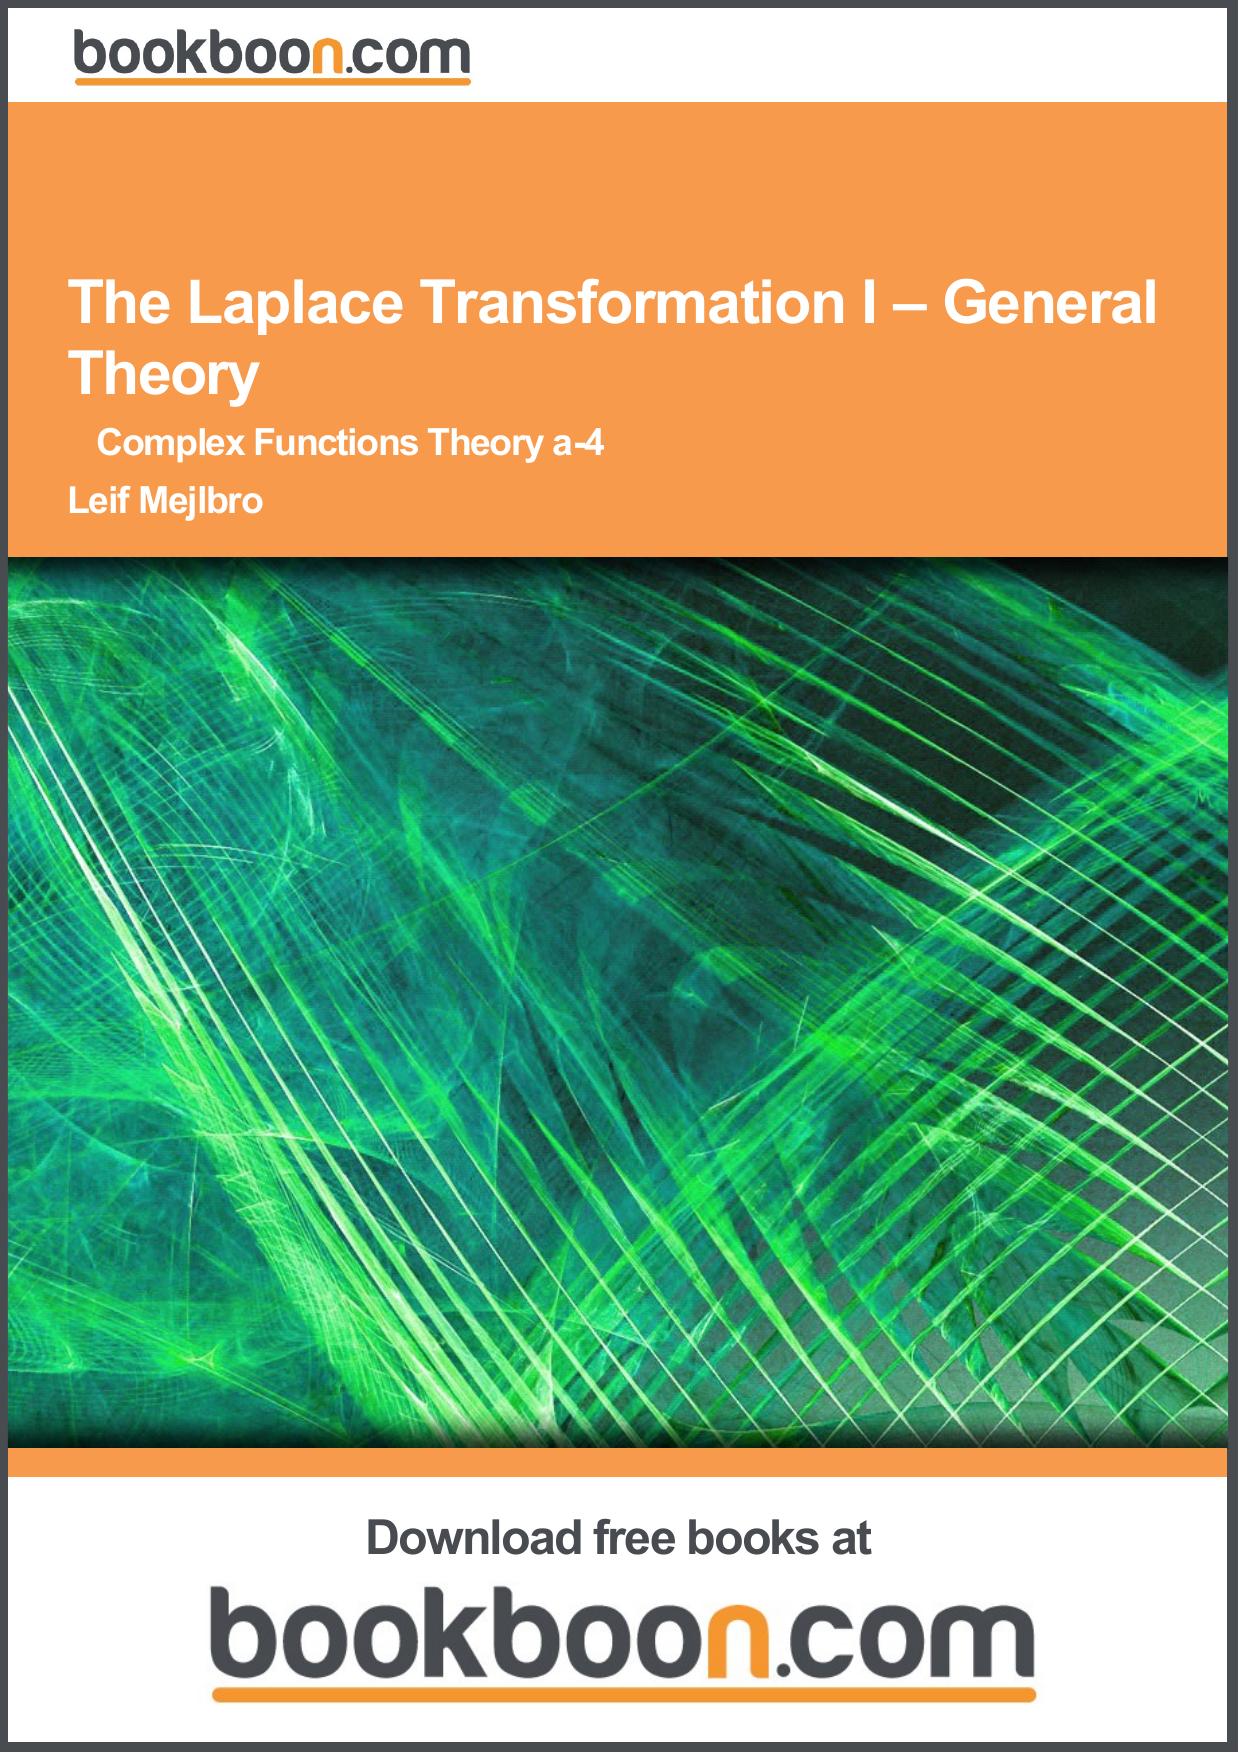 The Laplace Transformation I – General Theory - Complex Functions Theory a-4